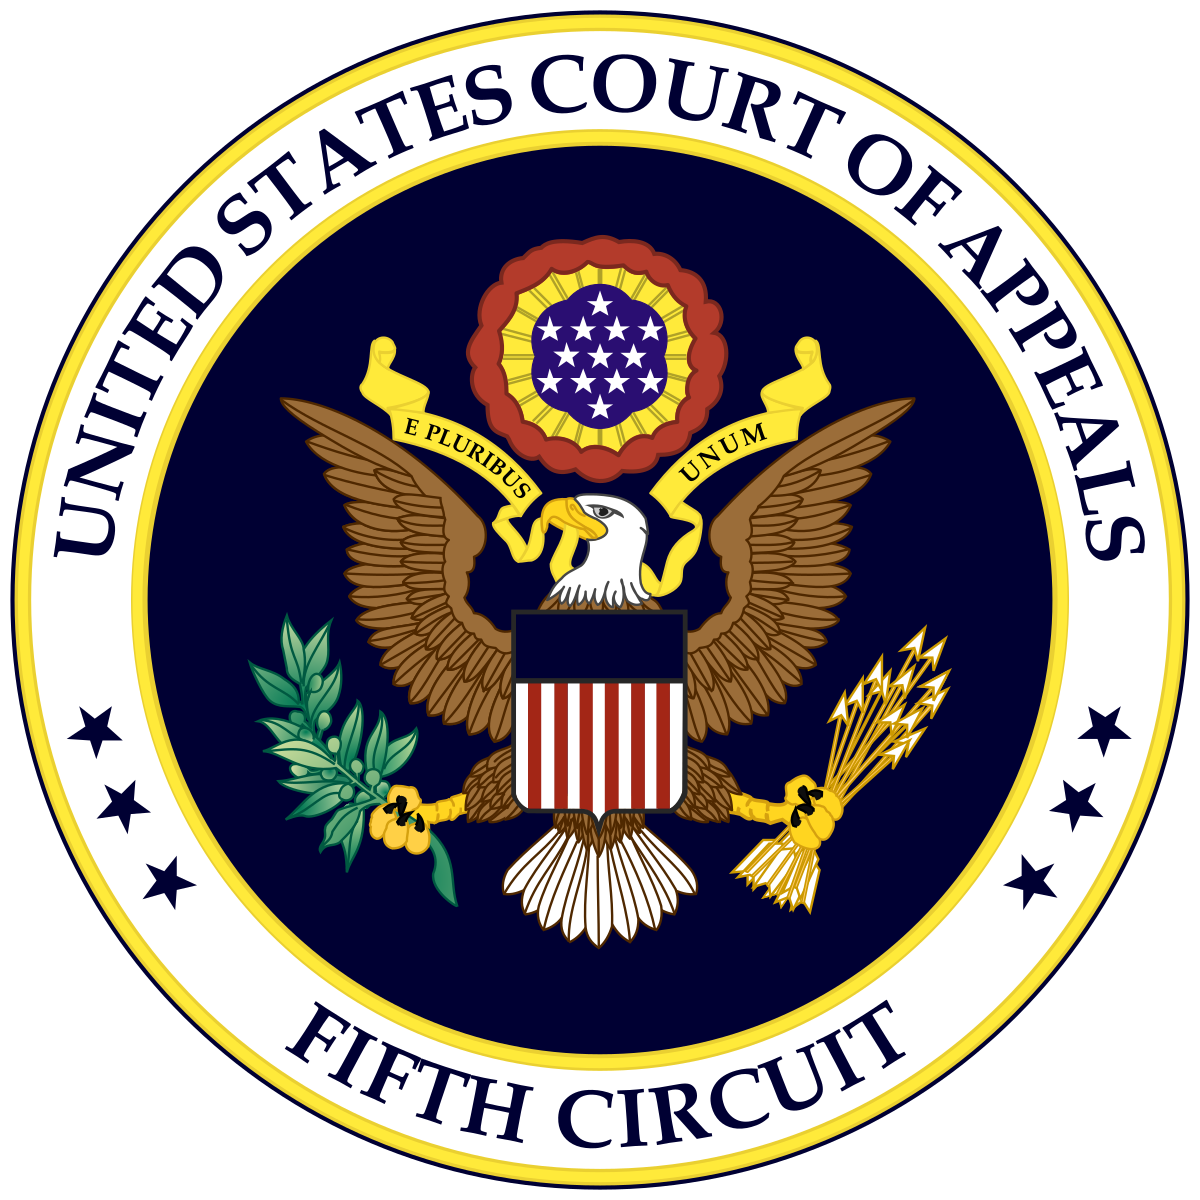 Official seal of the U.S. Court of Appeals for the 5th Circuit